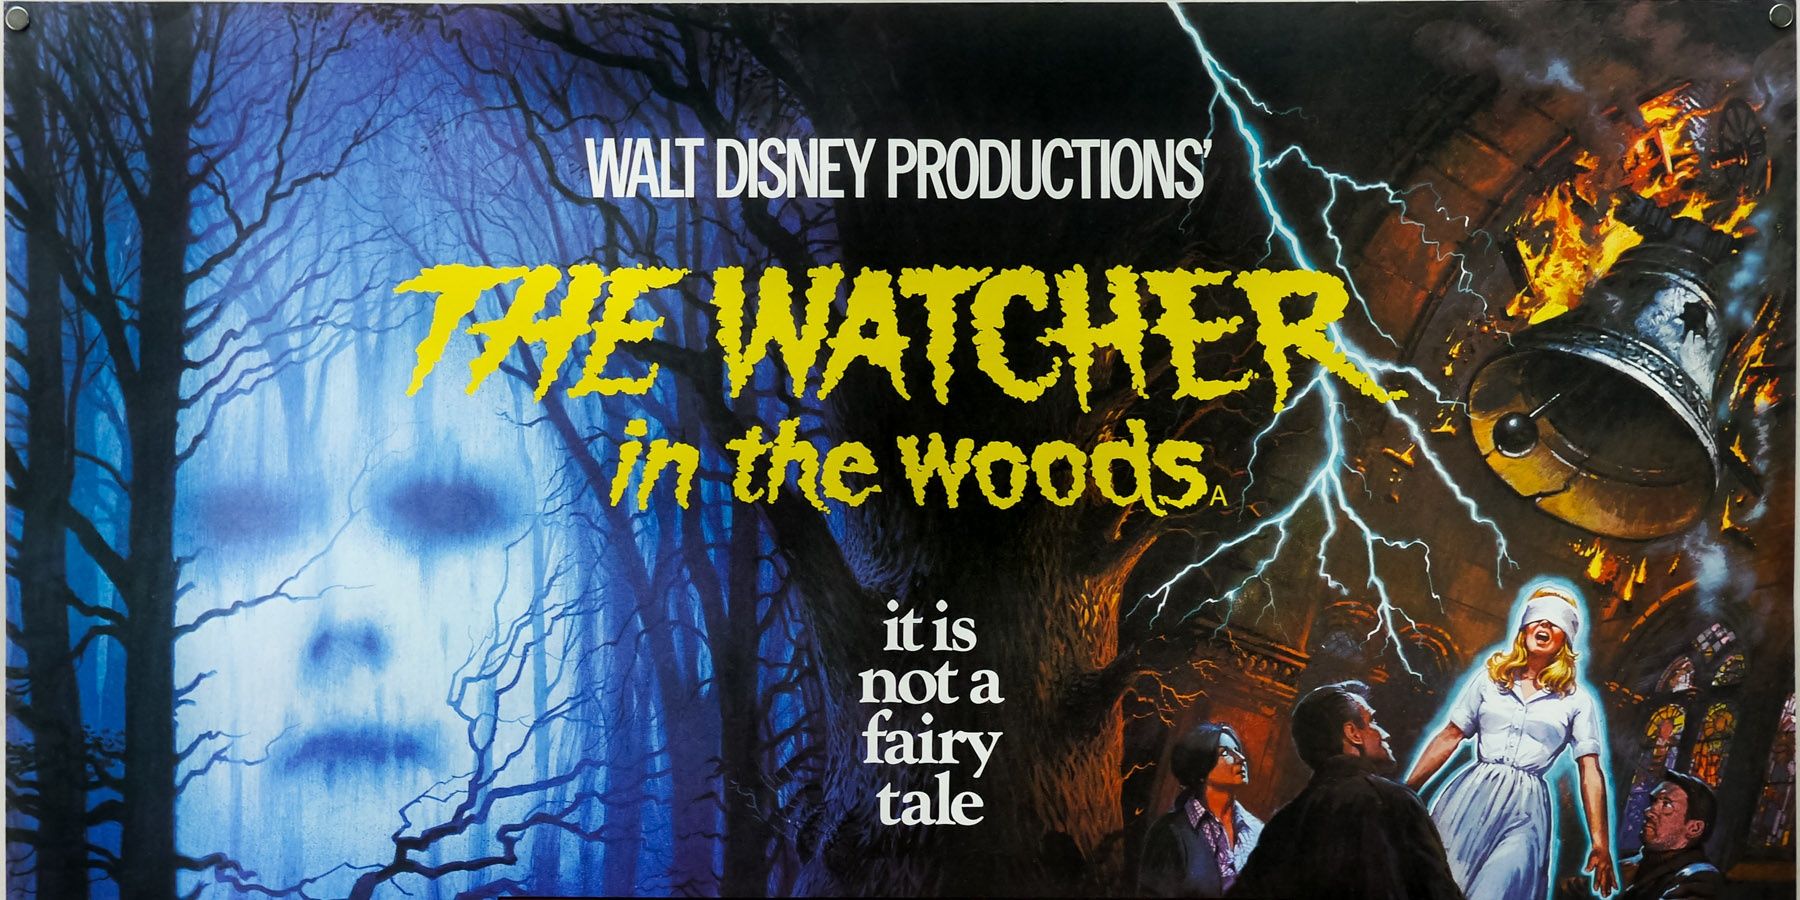 Disney's 'The Watcher in the Woods': The Creepy Alternate Endings That  Didn't Make The Final Cut